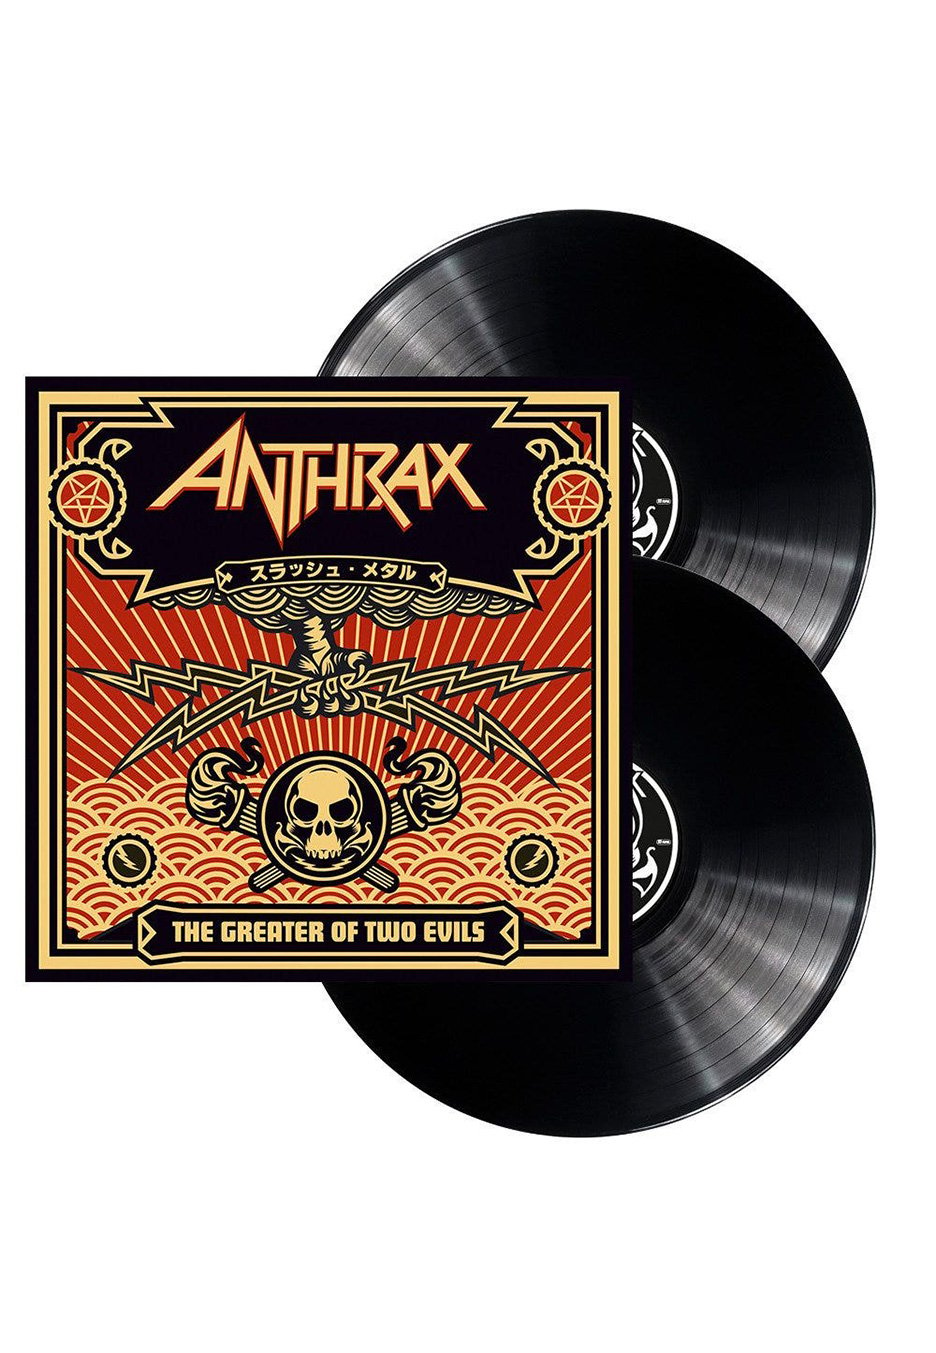 Anthrax - The Greater Of Two Evils - 2 Vinyl